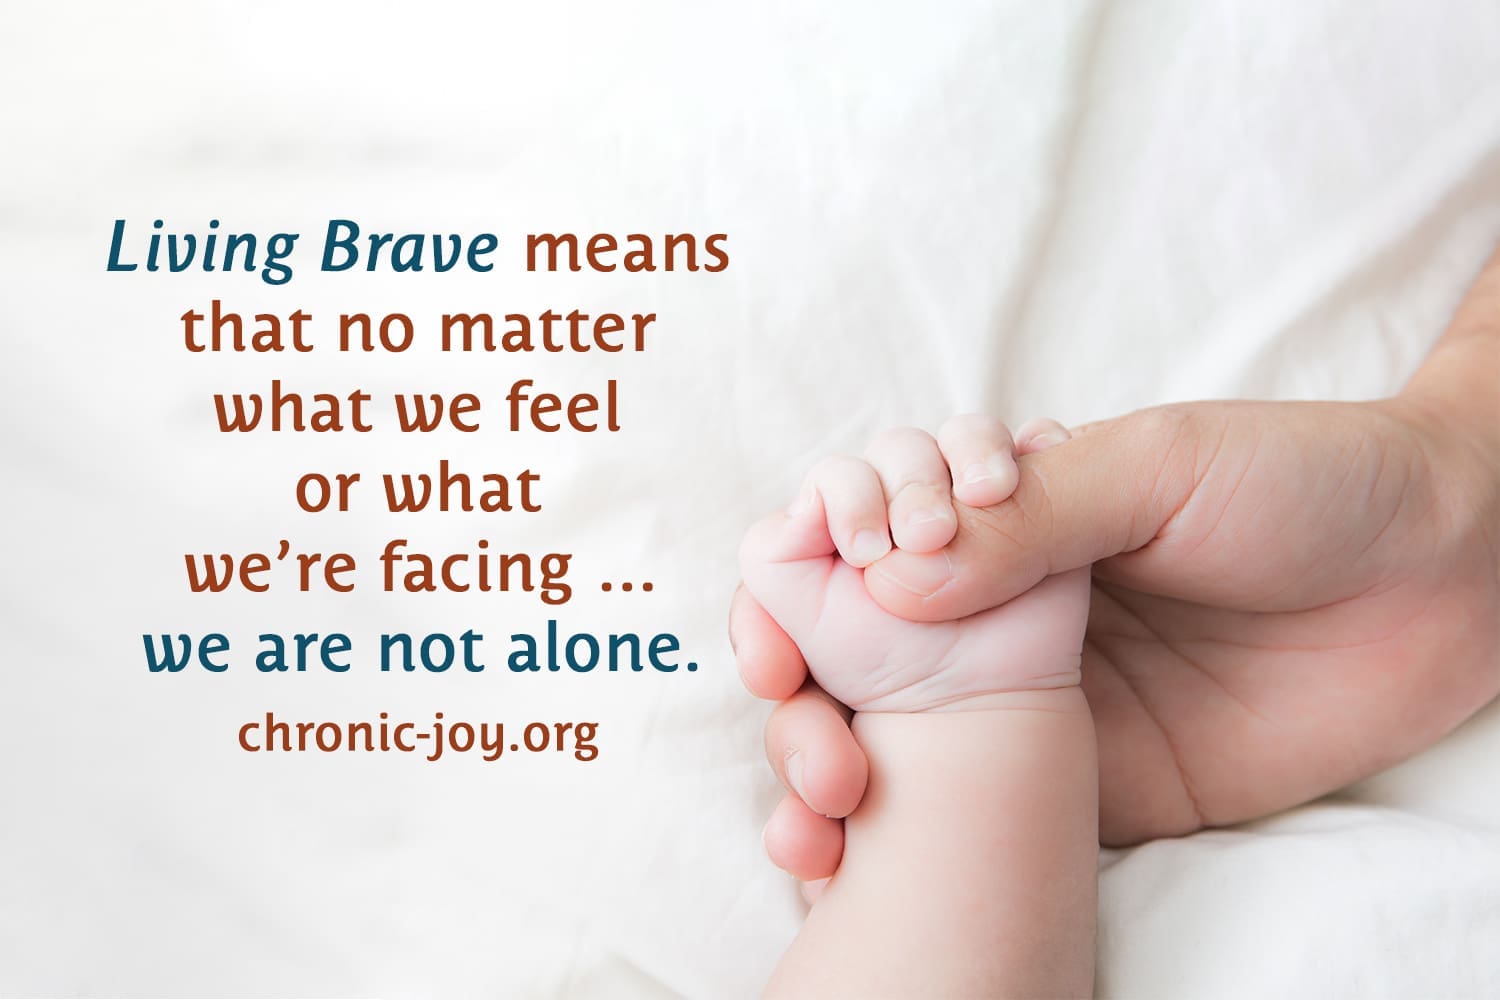 "Living Brave means that no matter what we feel or what we’re facing … we are not alone." chronic-joy.org